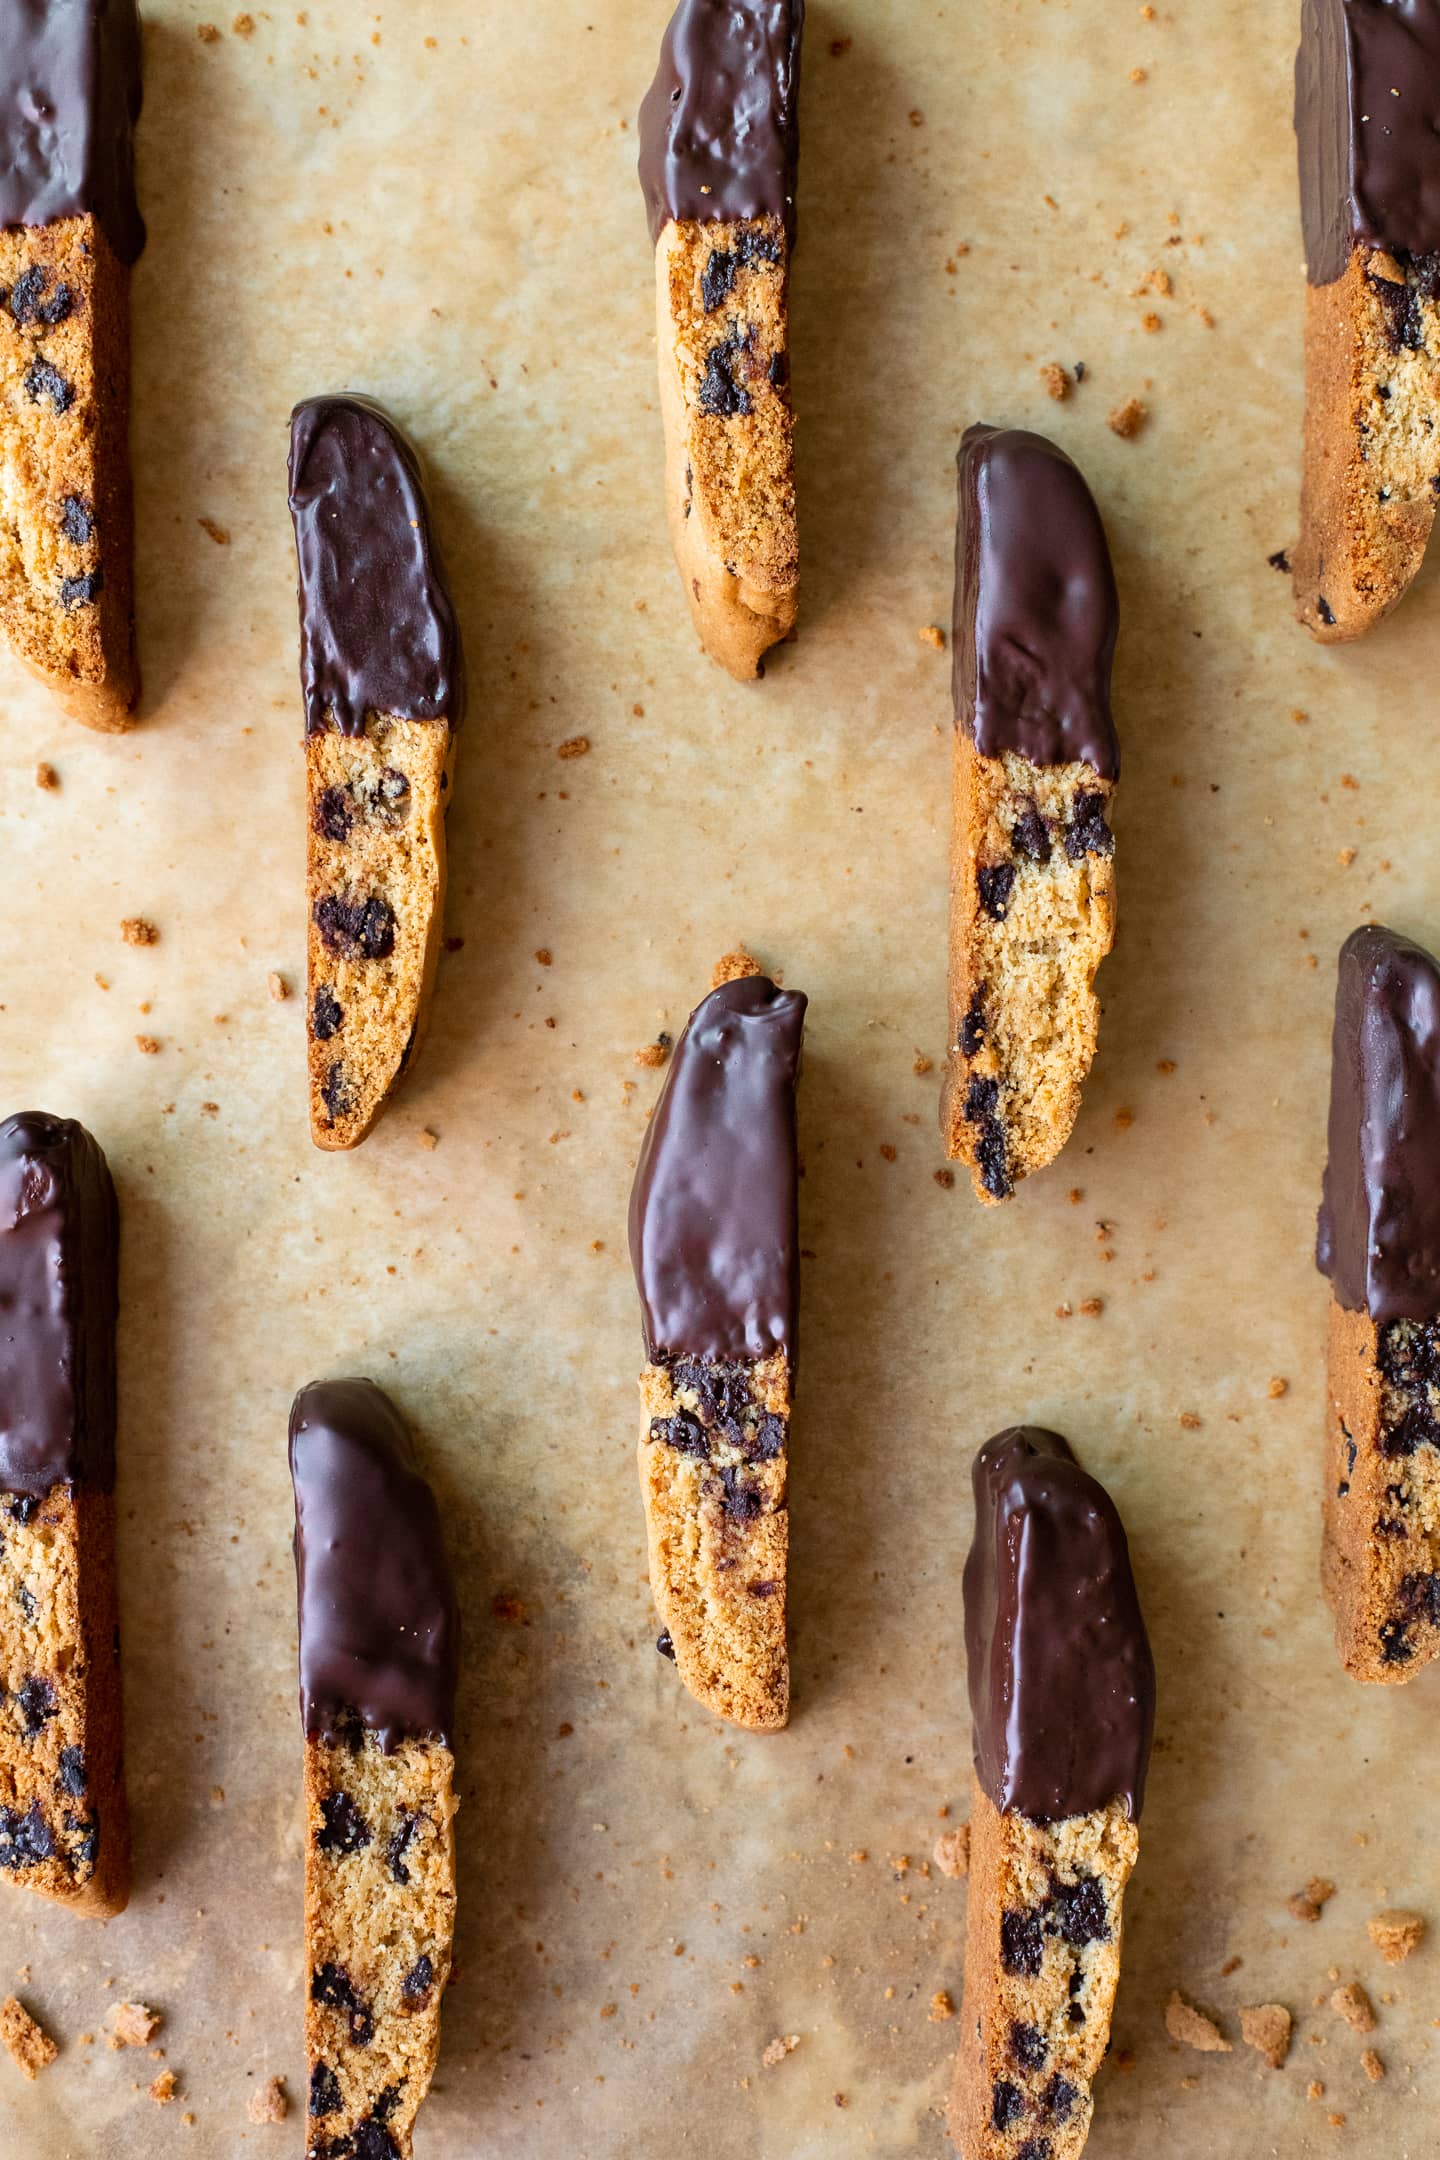 Chocolate chip biscotti dipped in chocolate and arranged on a baking sheet.